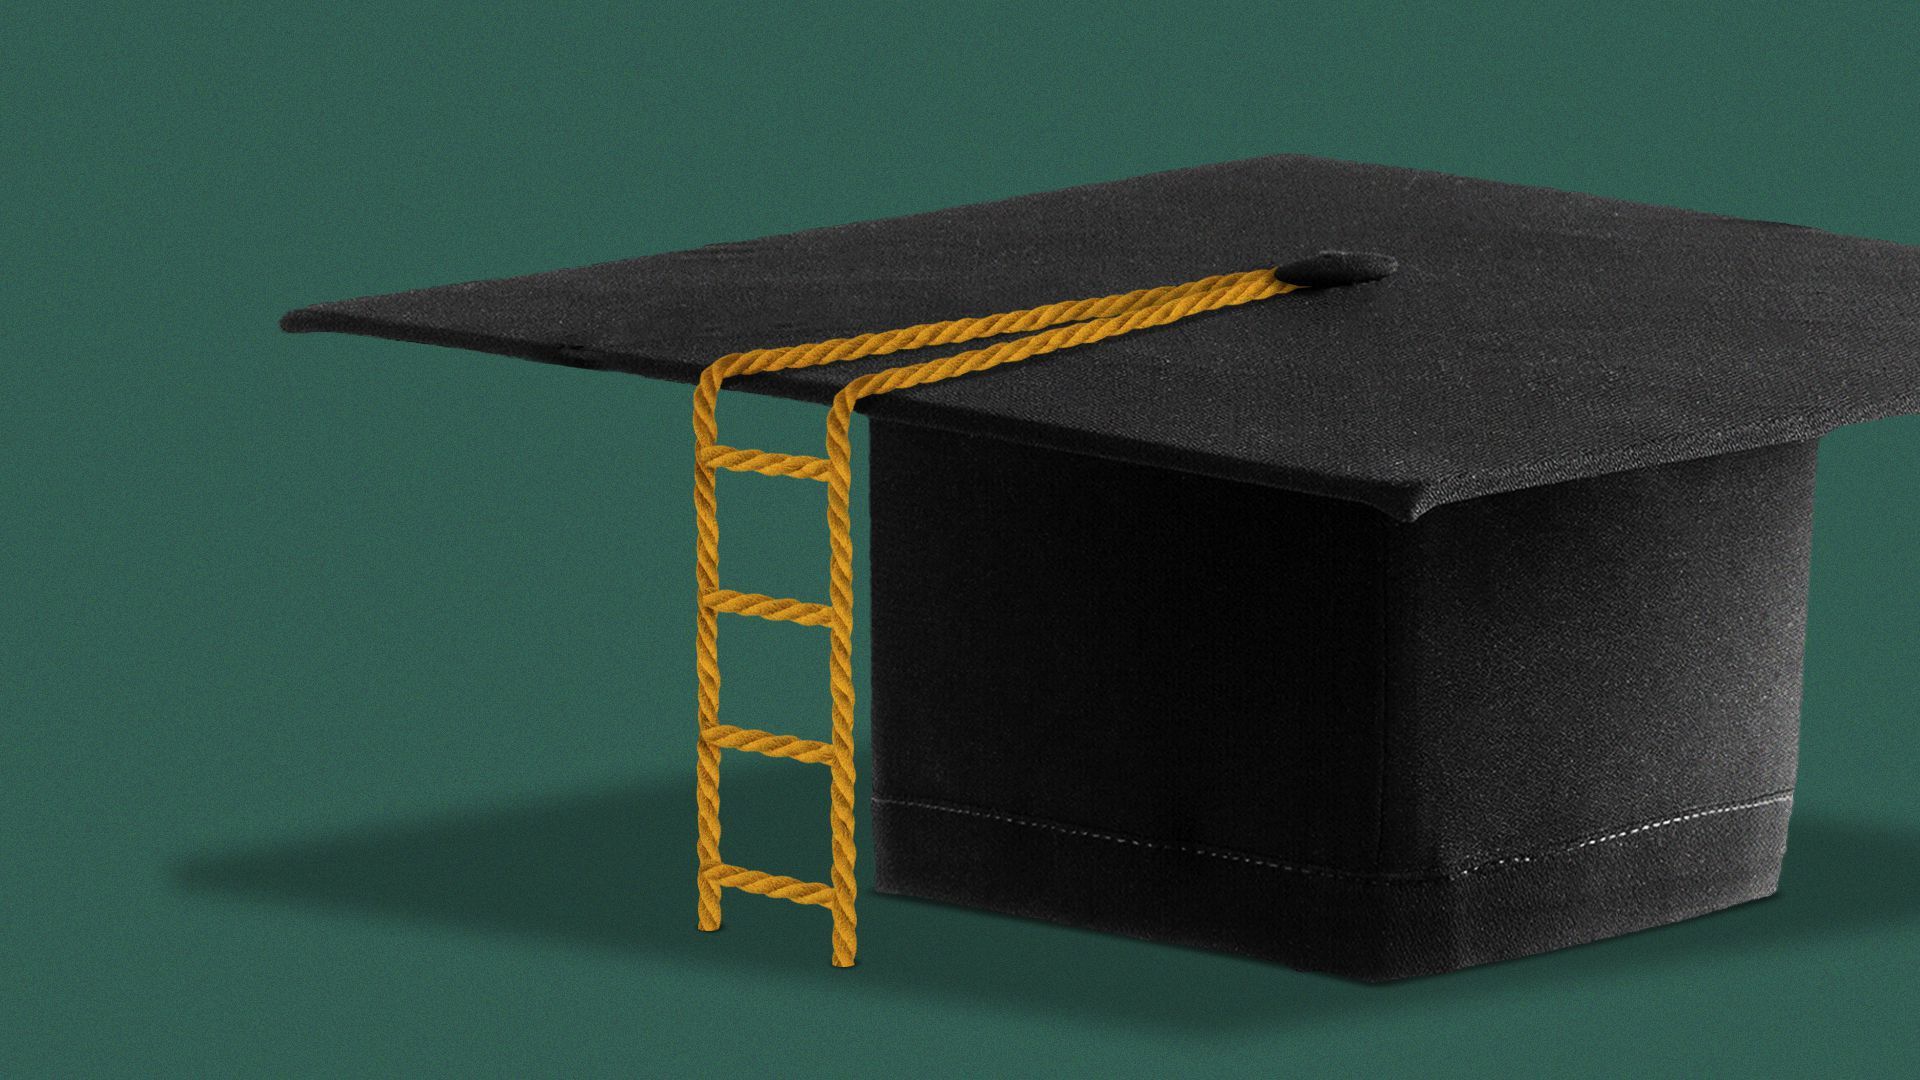 Illustration of a graduation hat with the tassels forming a ladder.